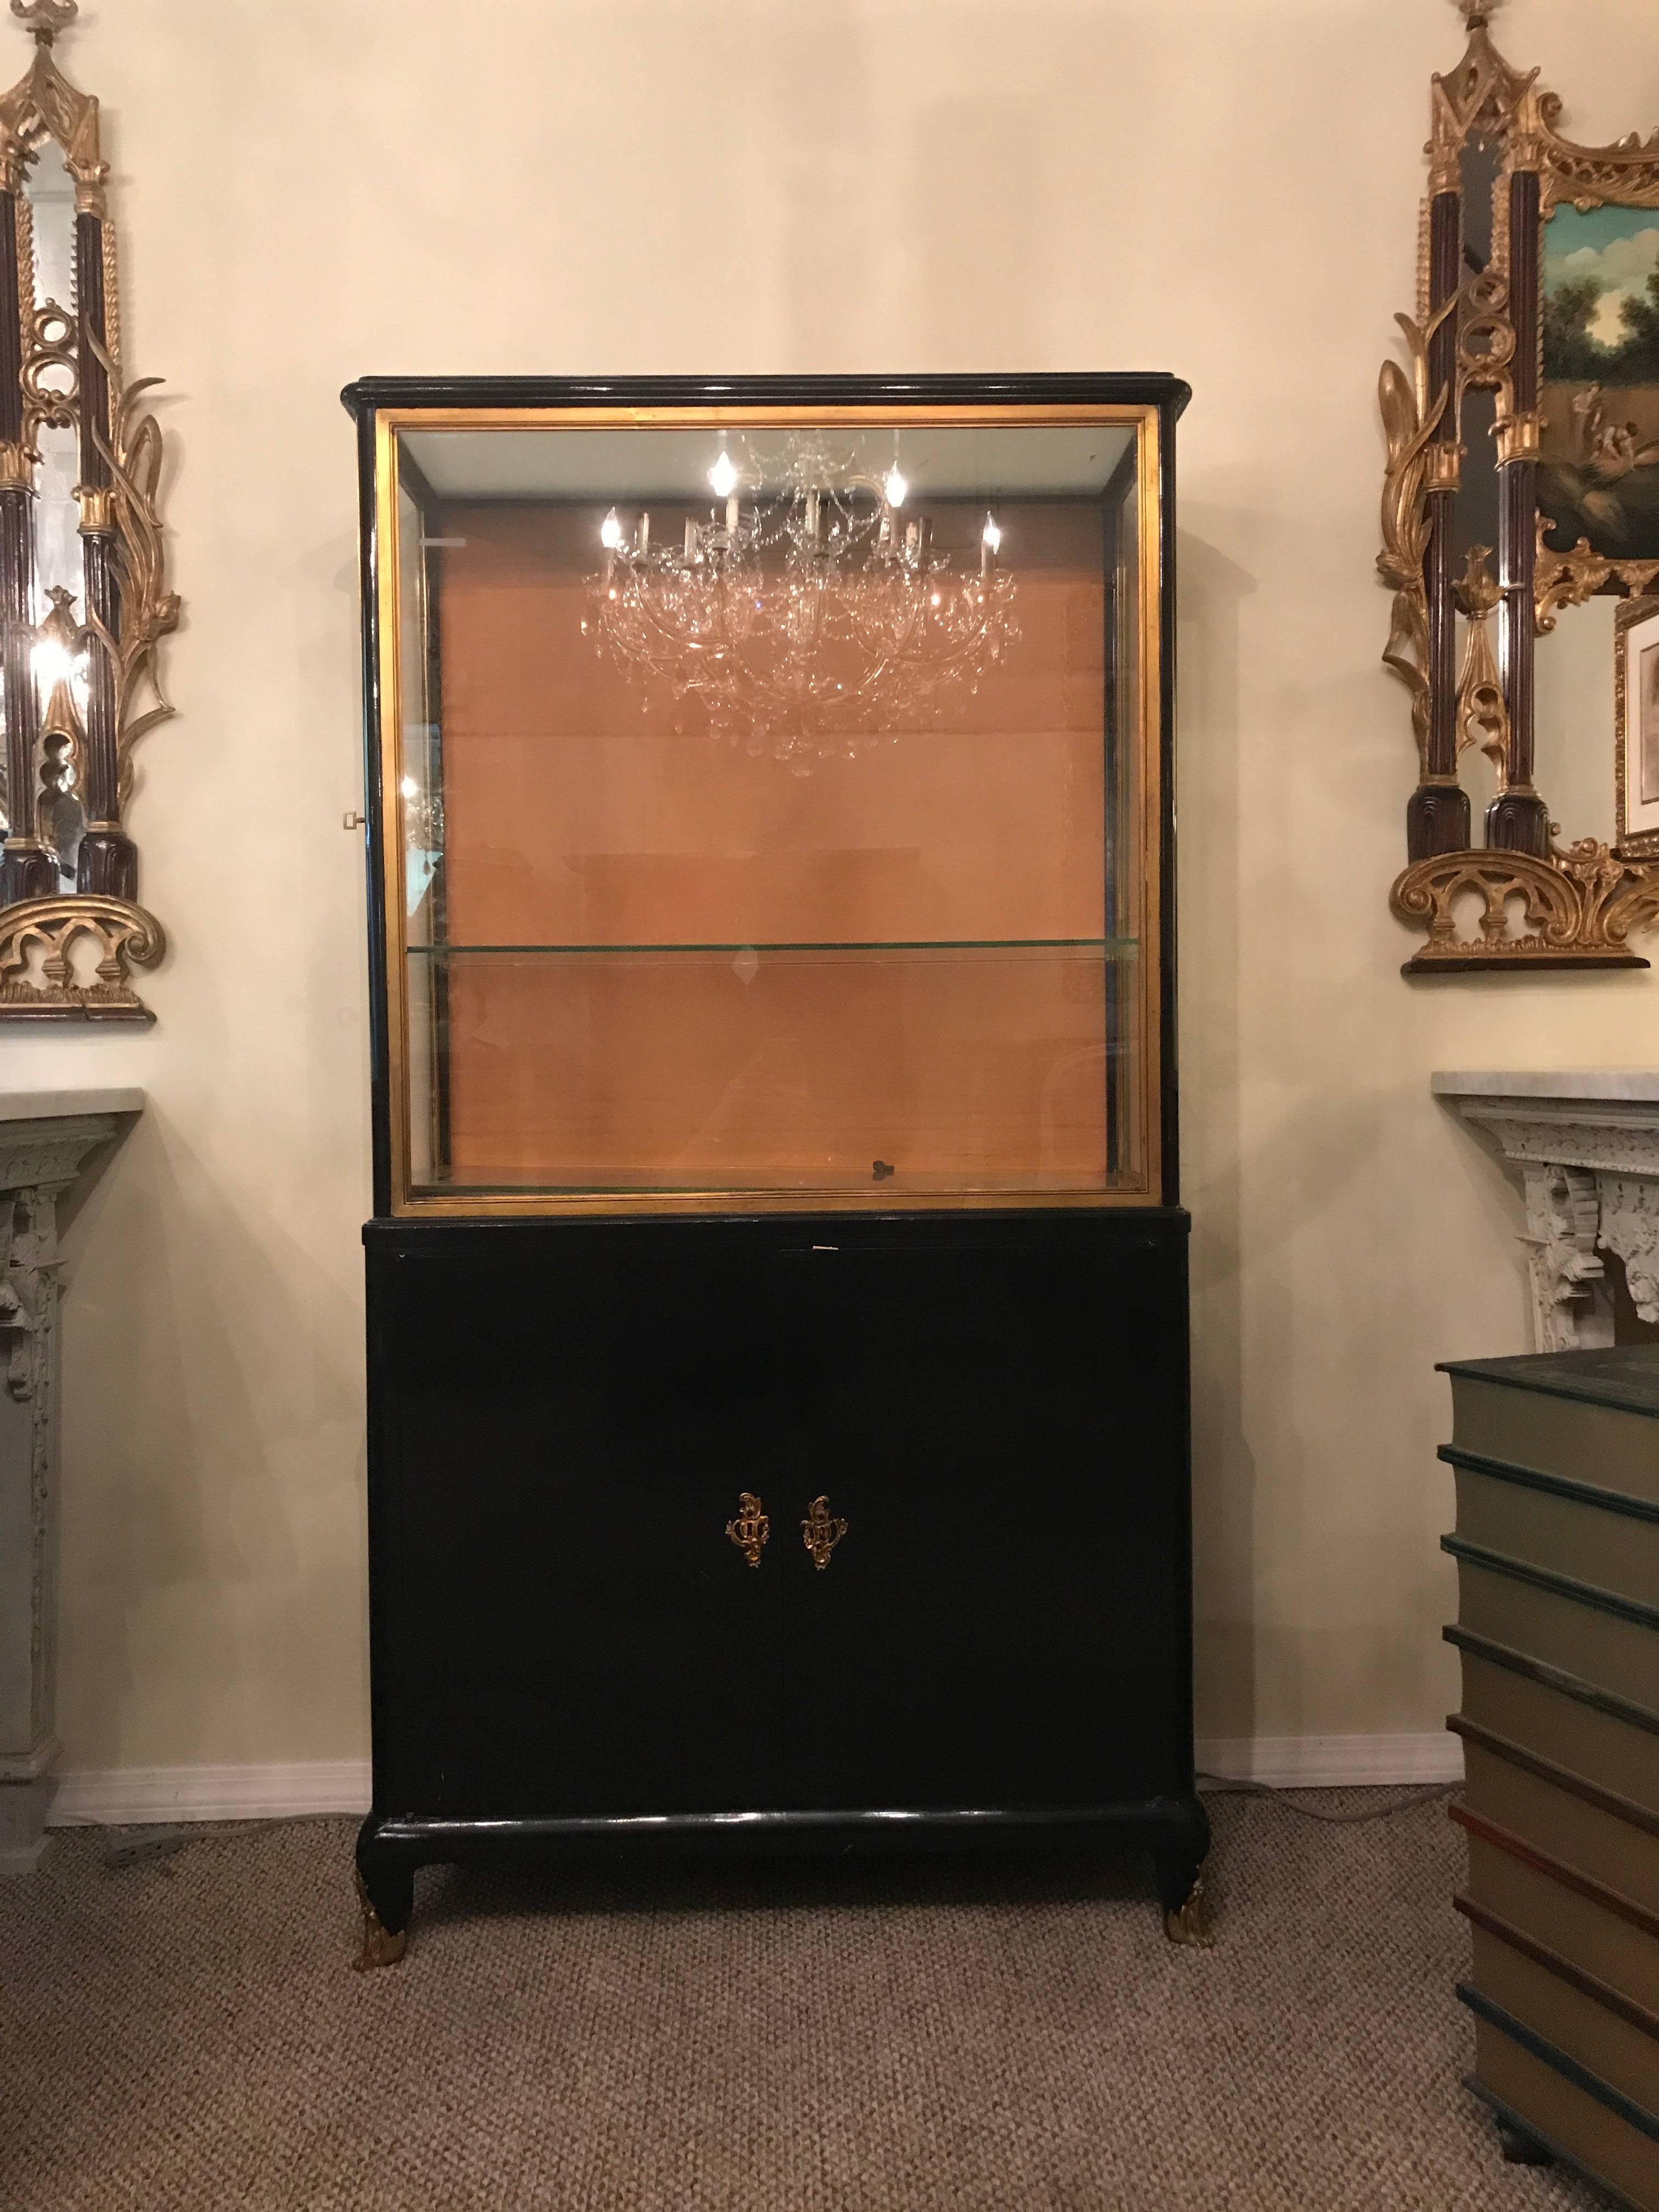 Ebonized vitrine or China cabinet bookcase manner of Jansen. The bronze sabot feet supporting a pair of lower doors under a showcase top in a bronze frame which opens from the sides rather than the front. Lighted.